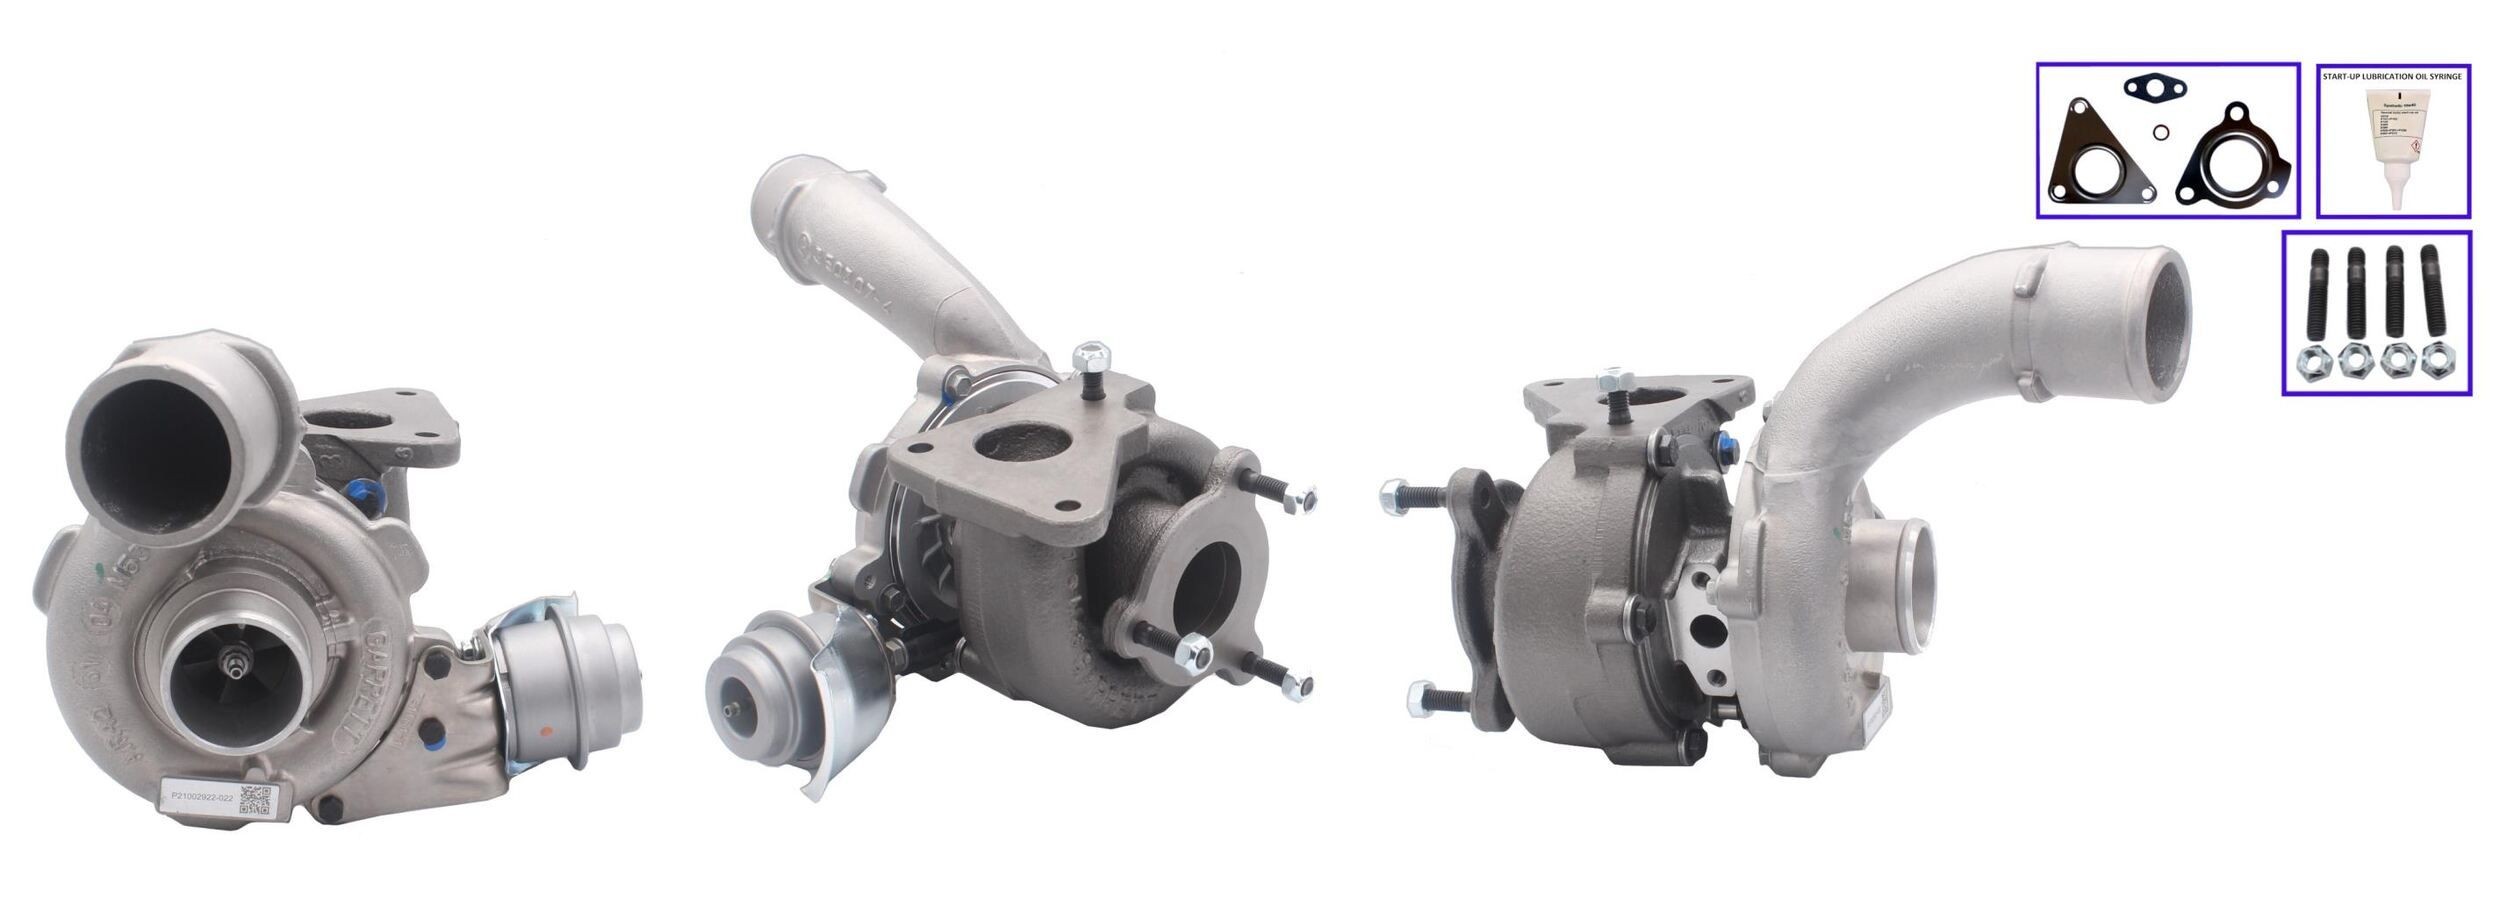 LUCAS LTRPA7086392 Turbocharger Exhaust Turbocharger, Pneumatically controlled actuator, with gaskets/seals